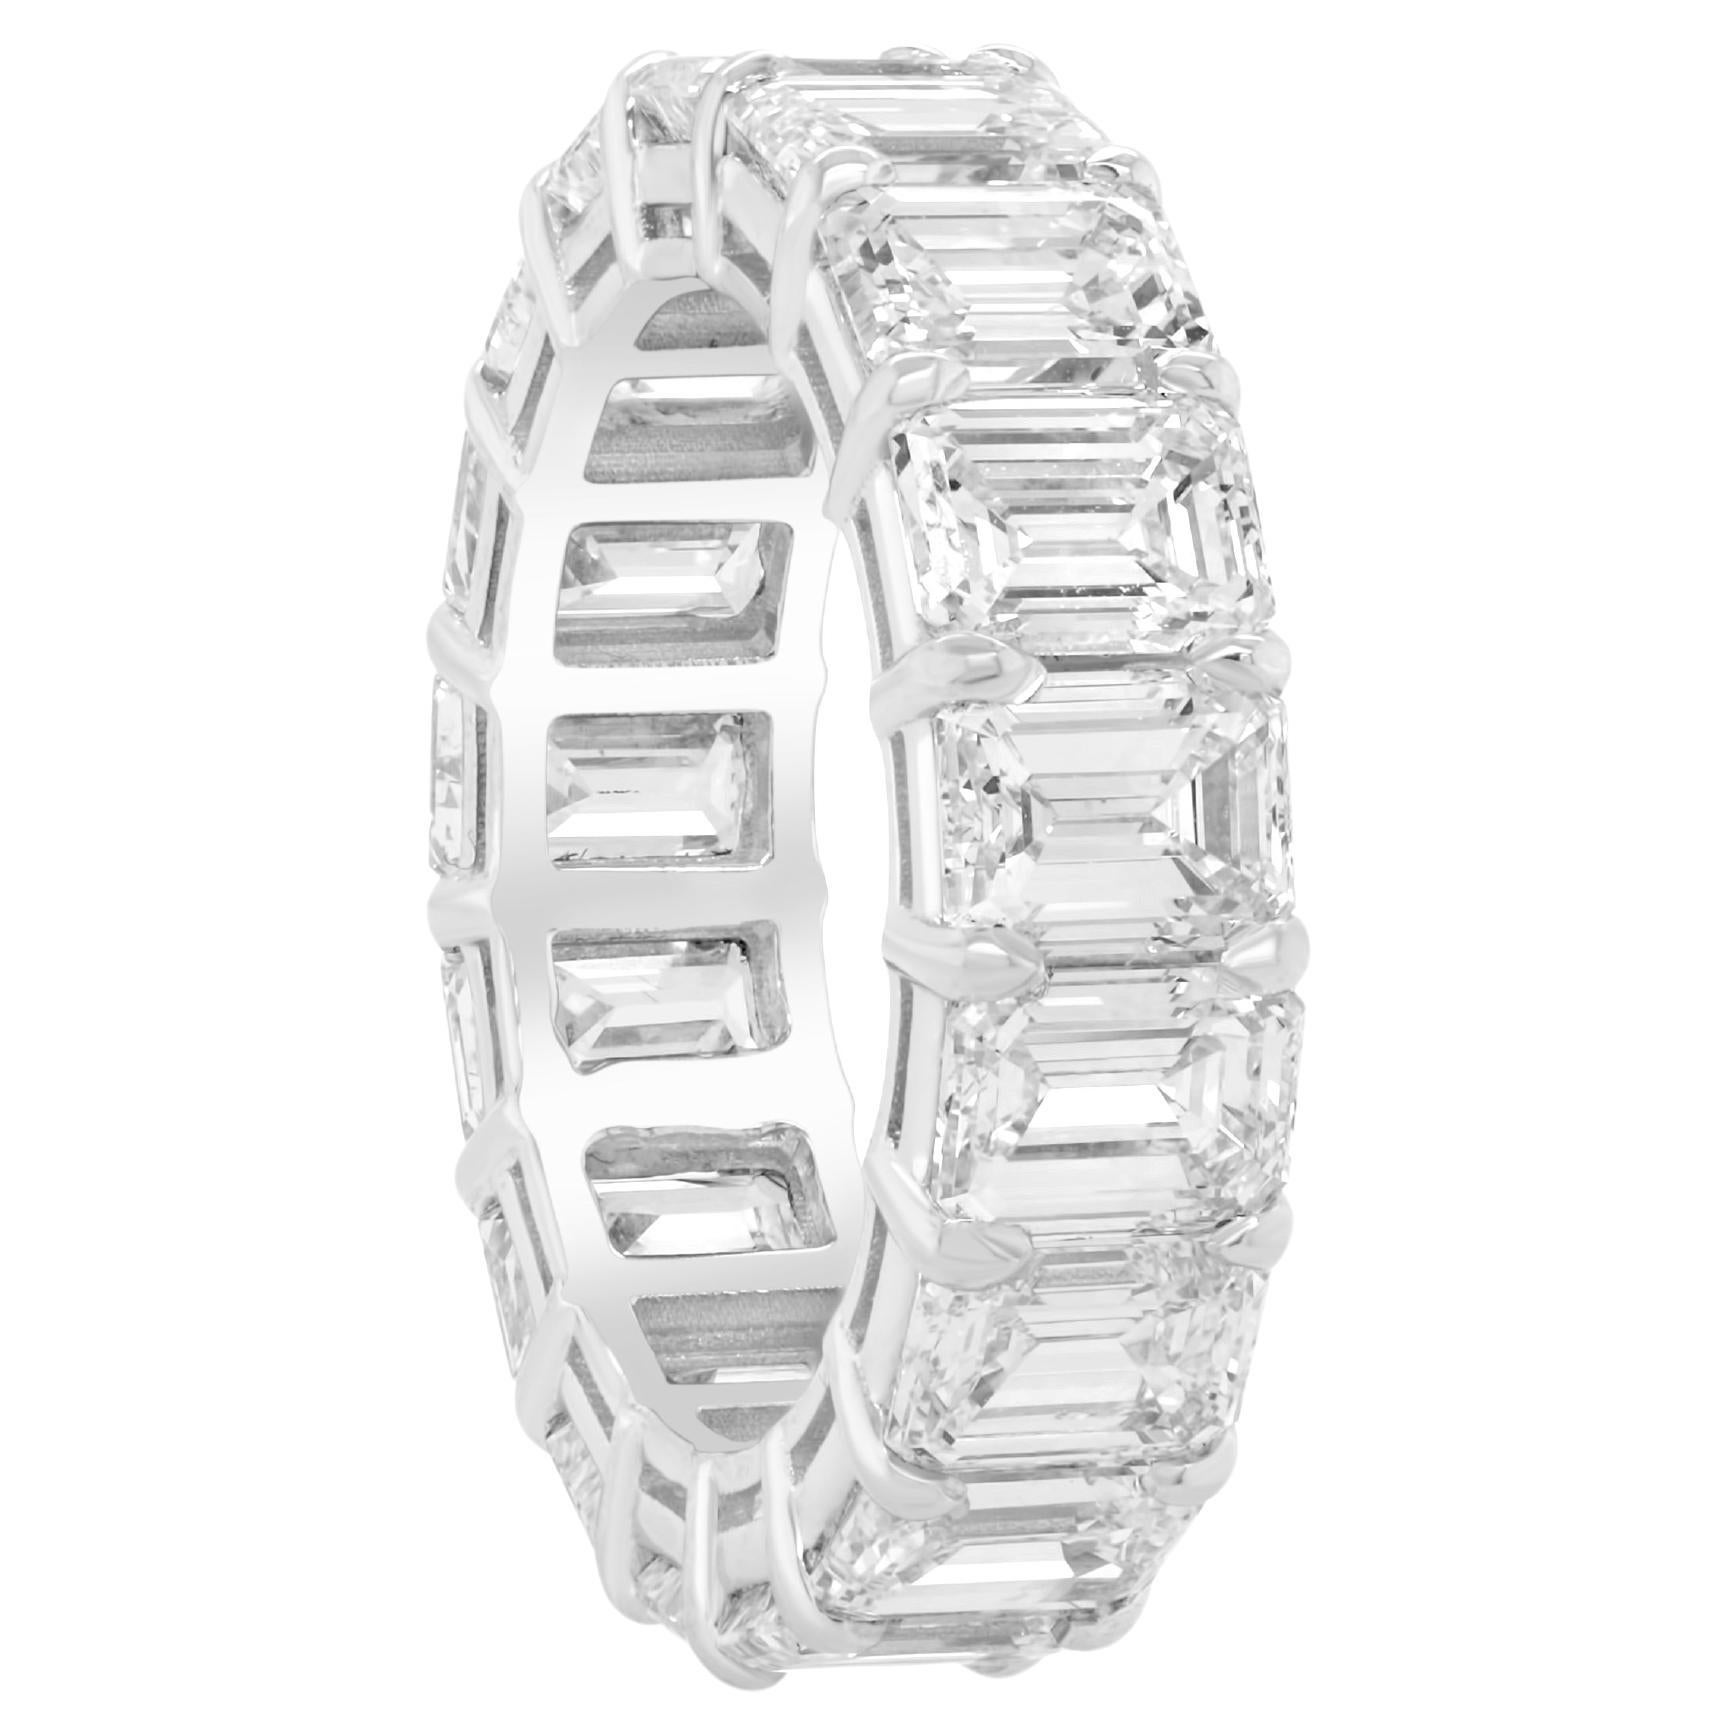 Diana M. PLATINUM WITH 19 EMERALD CUT DIAMONDS  RING, WIEGHING 6.40CTS For Sale